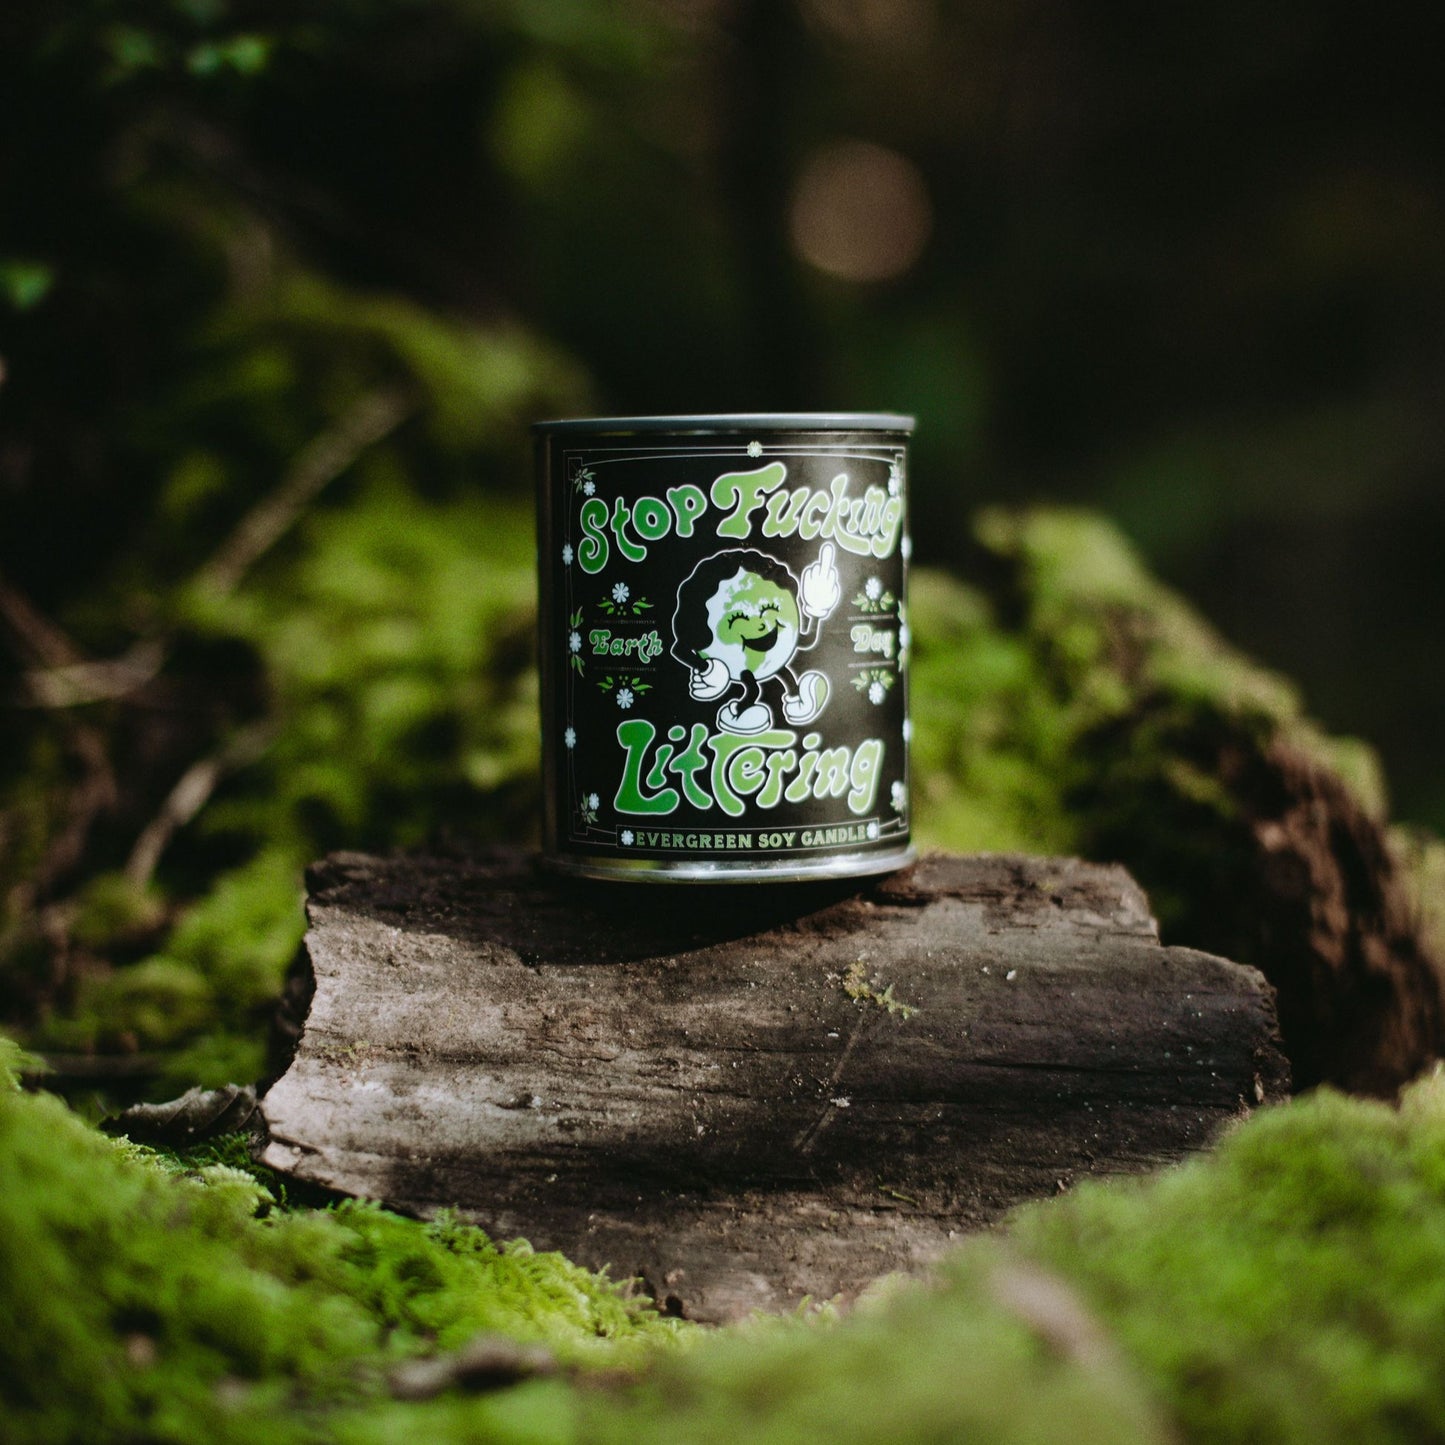 'Stop Littering' Earth Day Candle